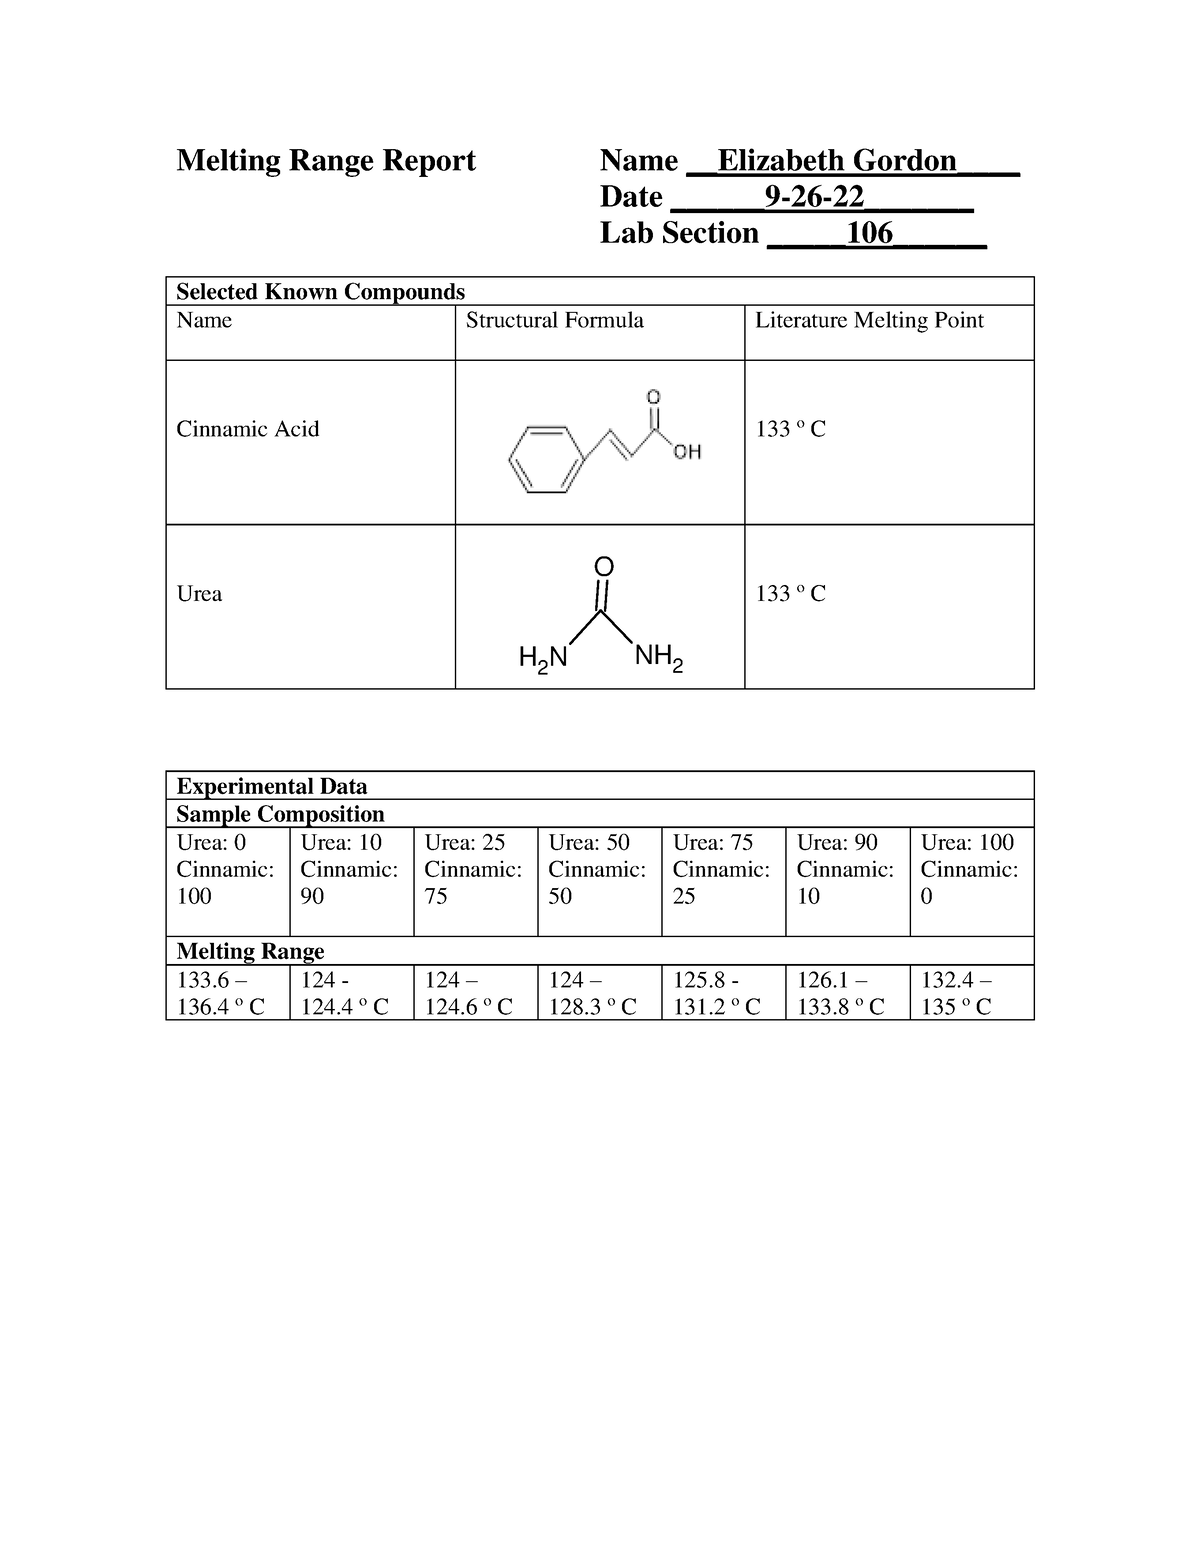 Melting Range Report Urea and cinnamic acid were chosen and their